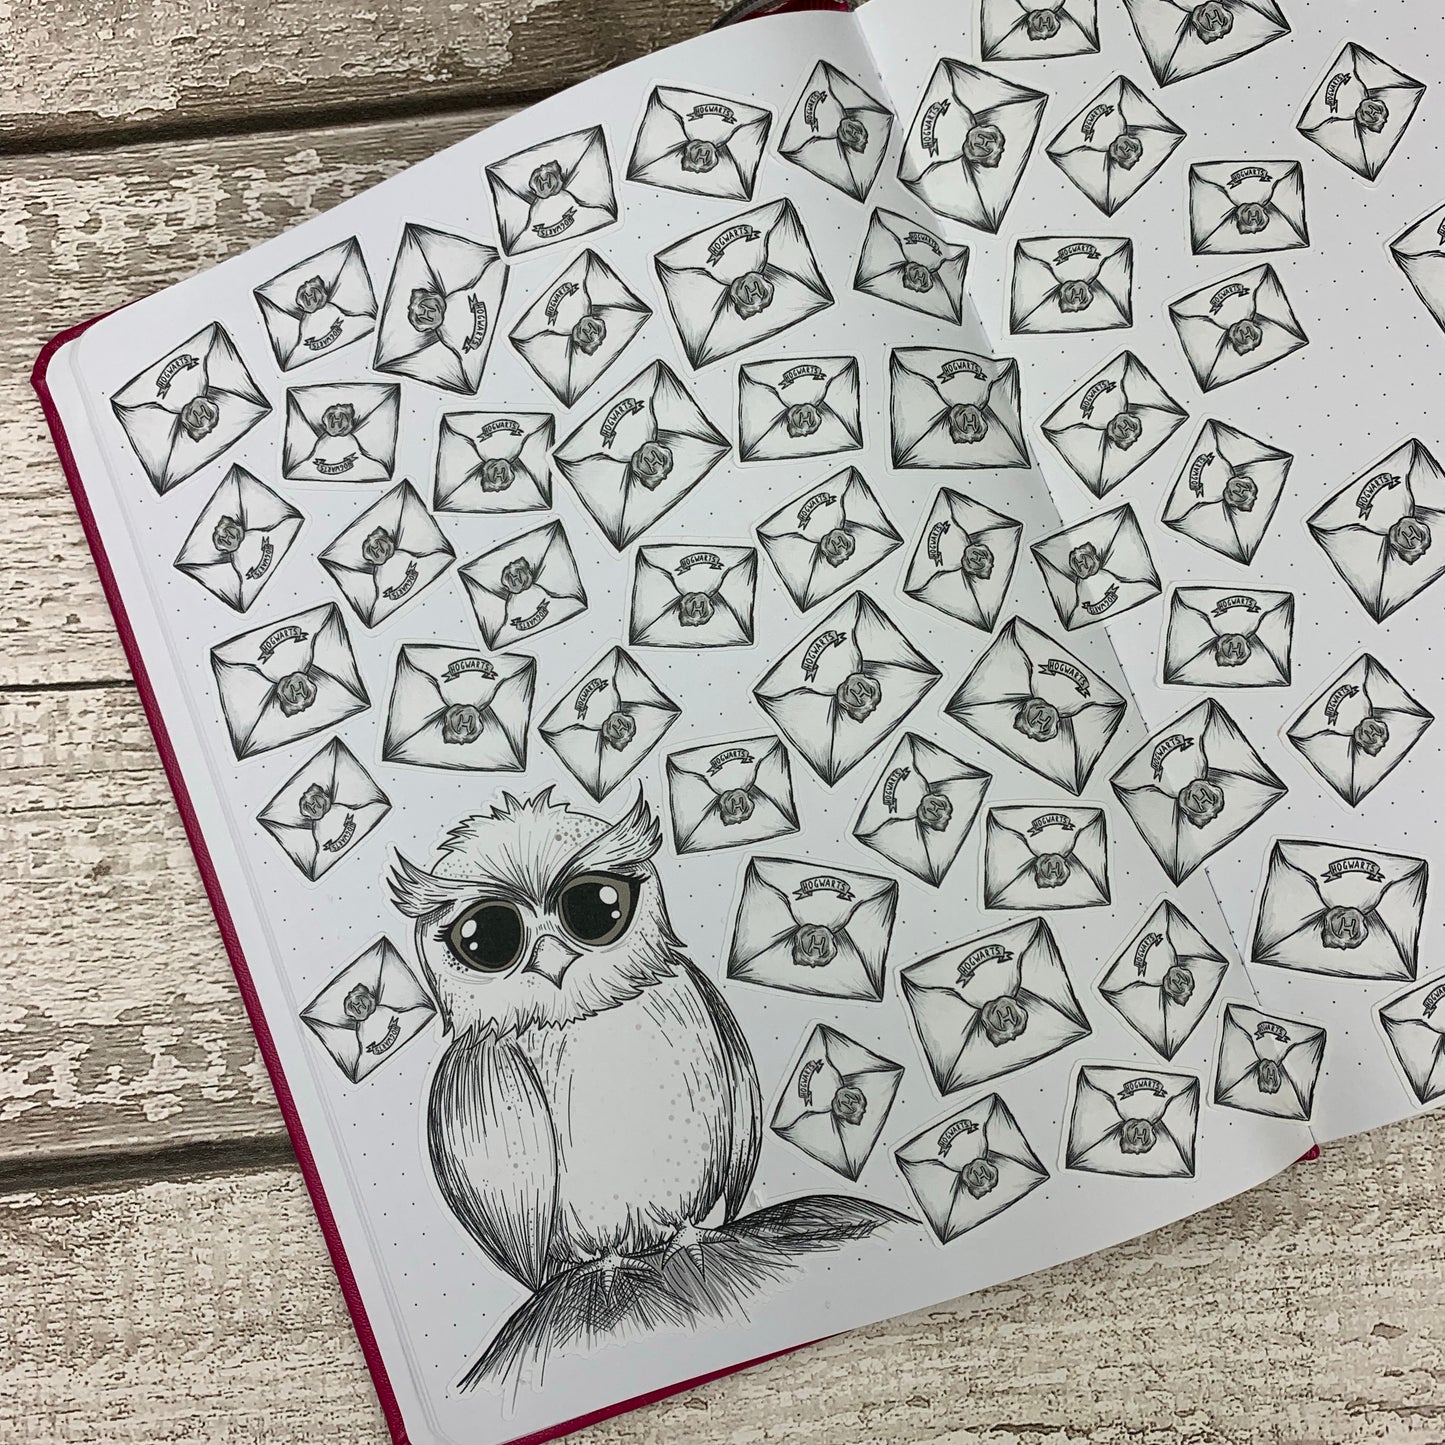 Owl and letters Bullet Journal Style Tracker a5 sticker (DPD006)